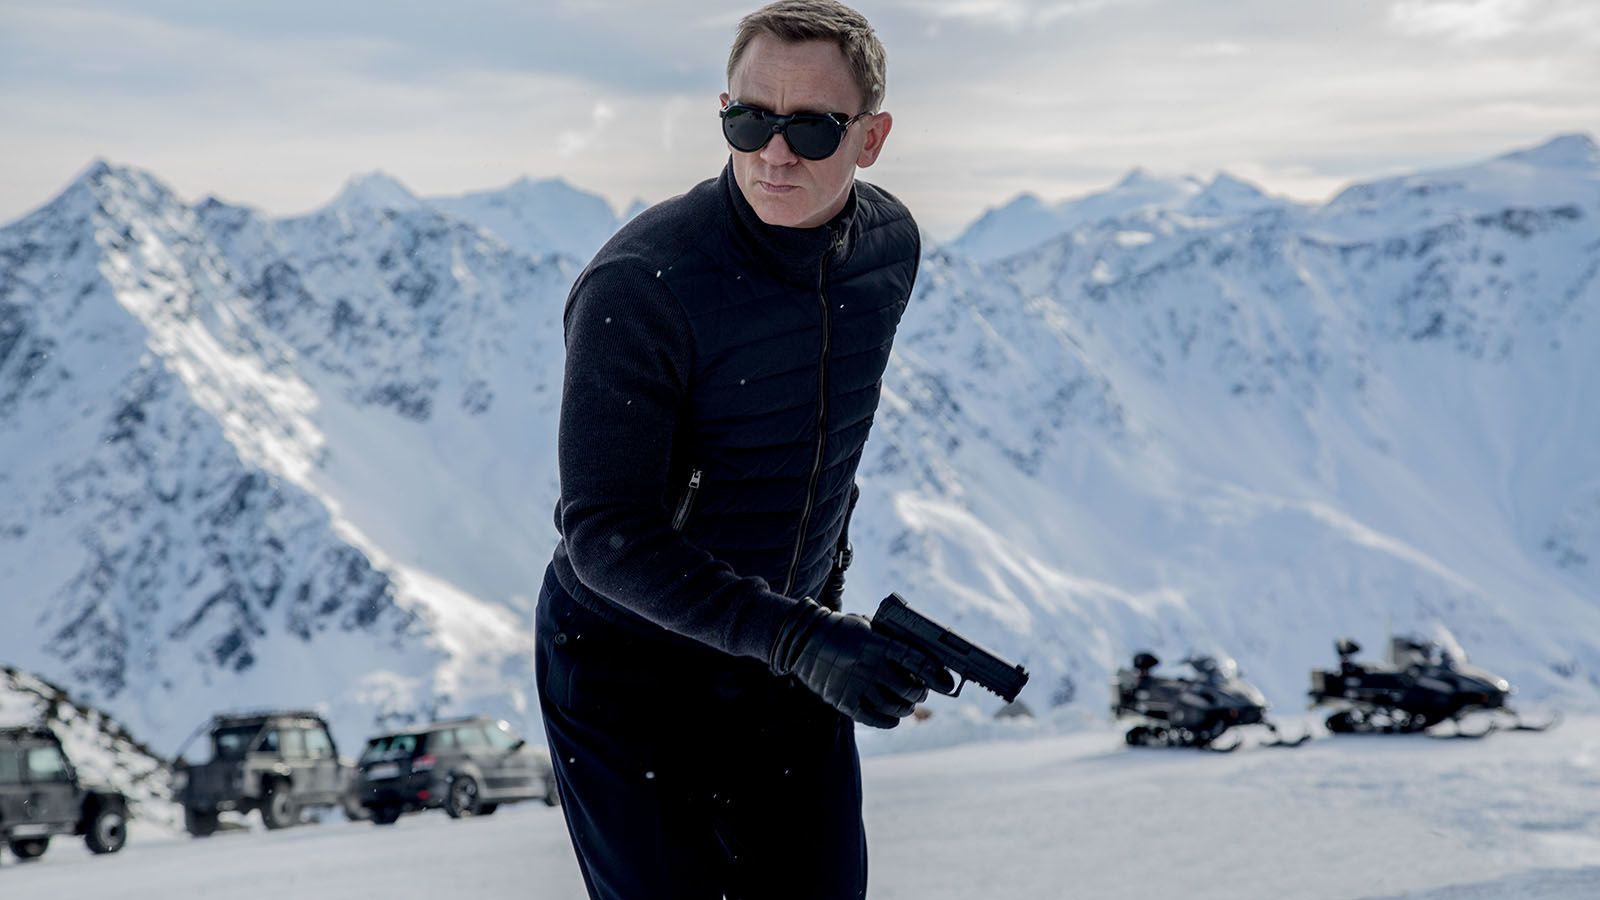 A view to a sell: will Spectre's brands get the traditional Bond boost?, James Bond